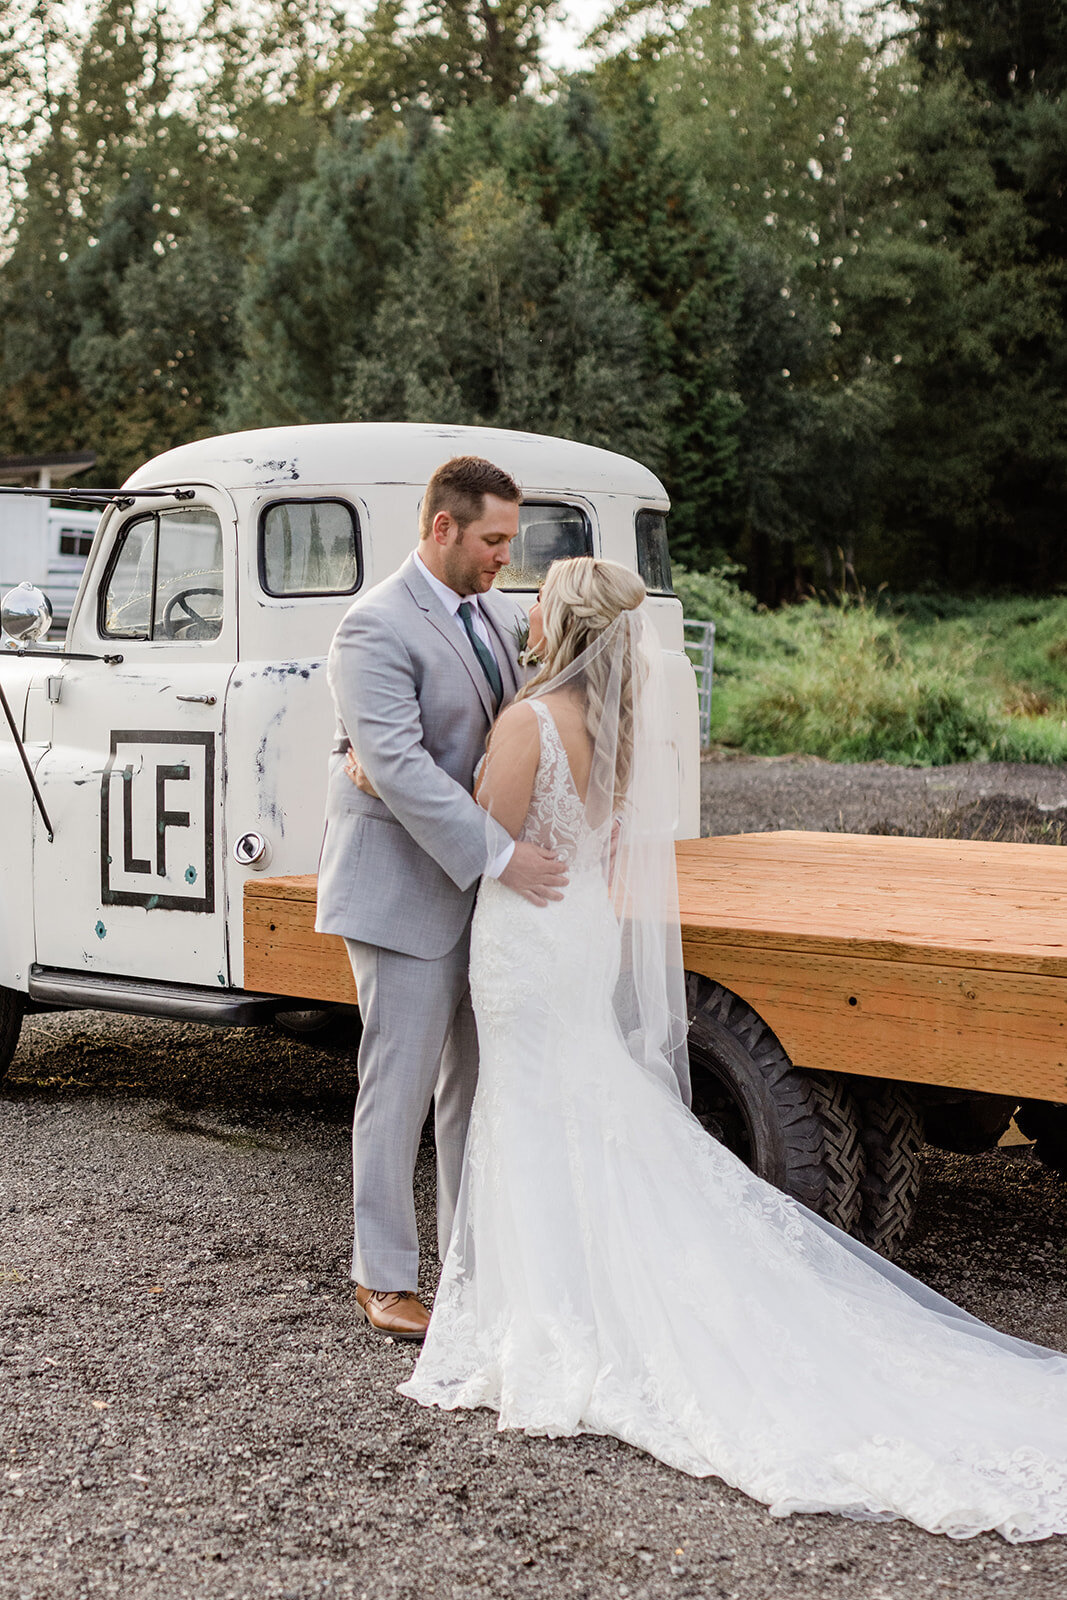 Photos at liljebeck farms wedding venue in woodinville